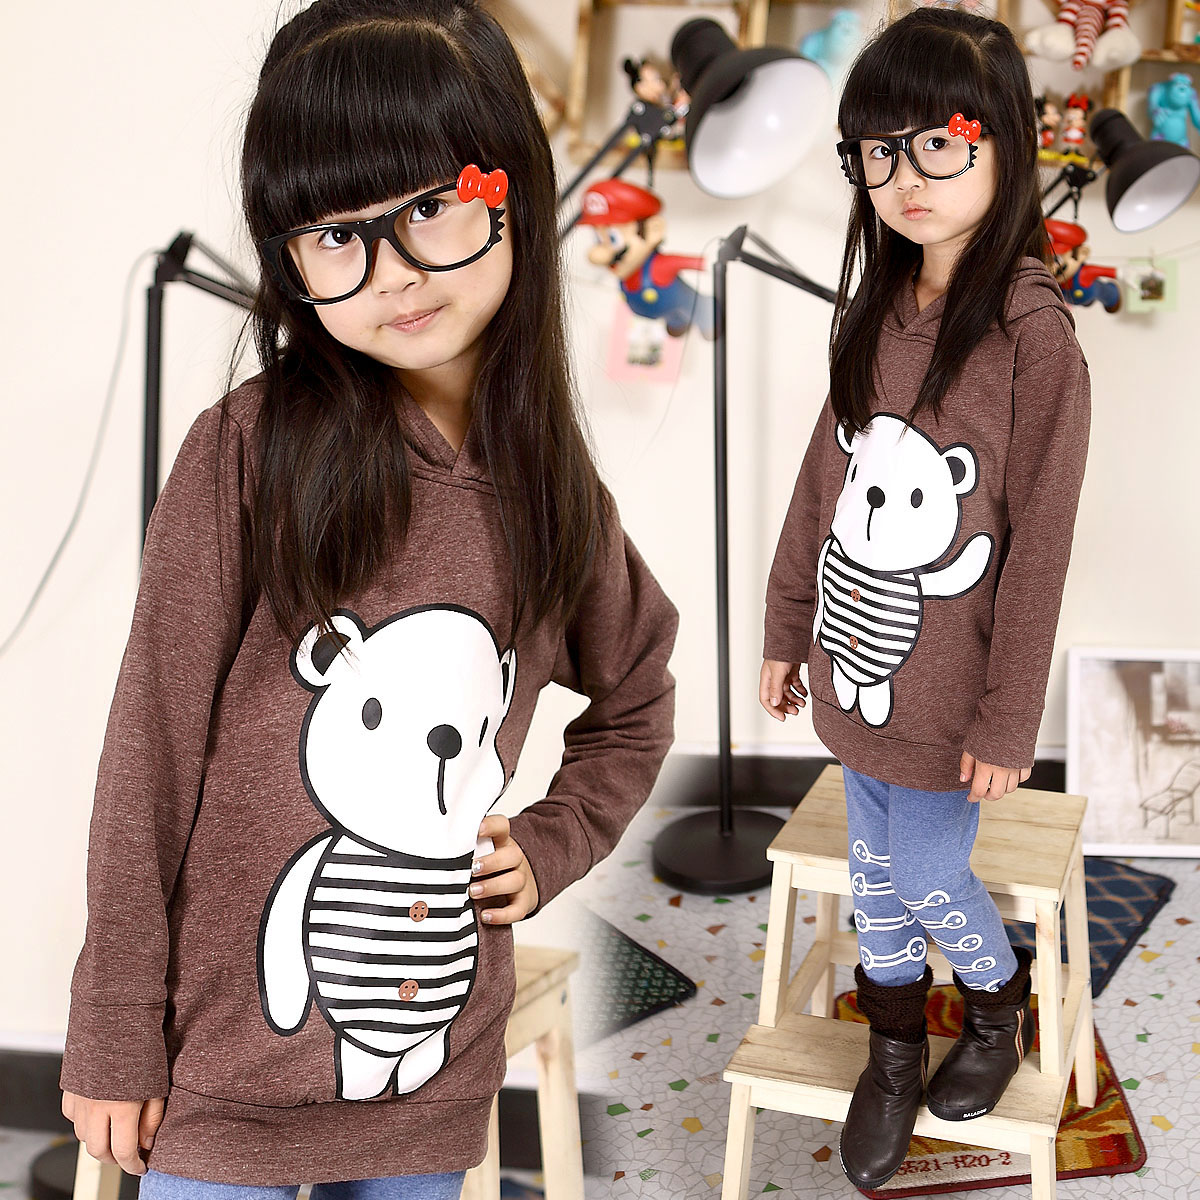 Kids Fashion Children's clothing spring 2013 female child casual top baby printed bear hooded sweatshirt f10933 Free Shipping